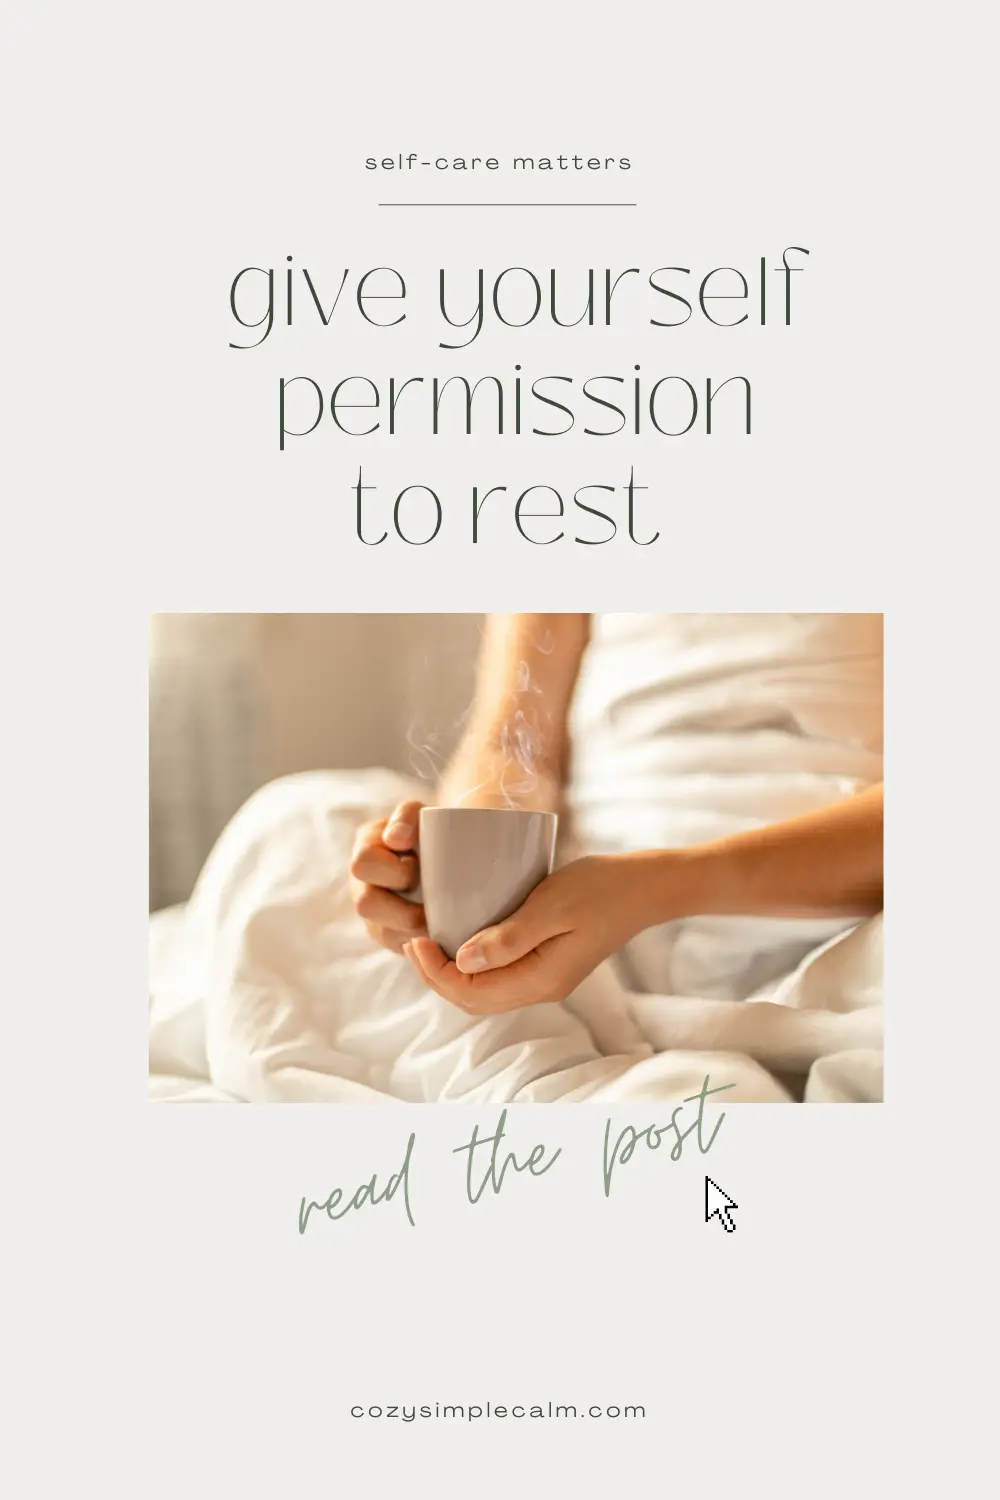 Image of hands holding steaming mug - Text overlay: Self-care matters. Give yourself permission to rest. Read the post. cozysimplecalm.com